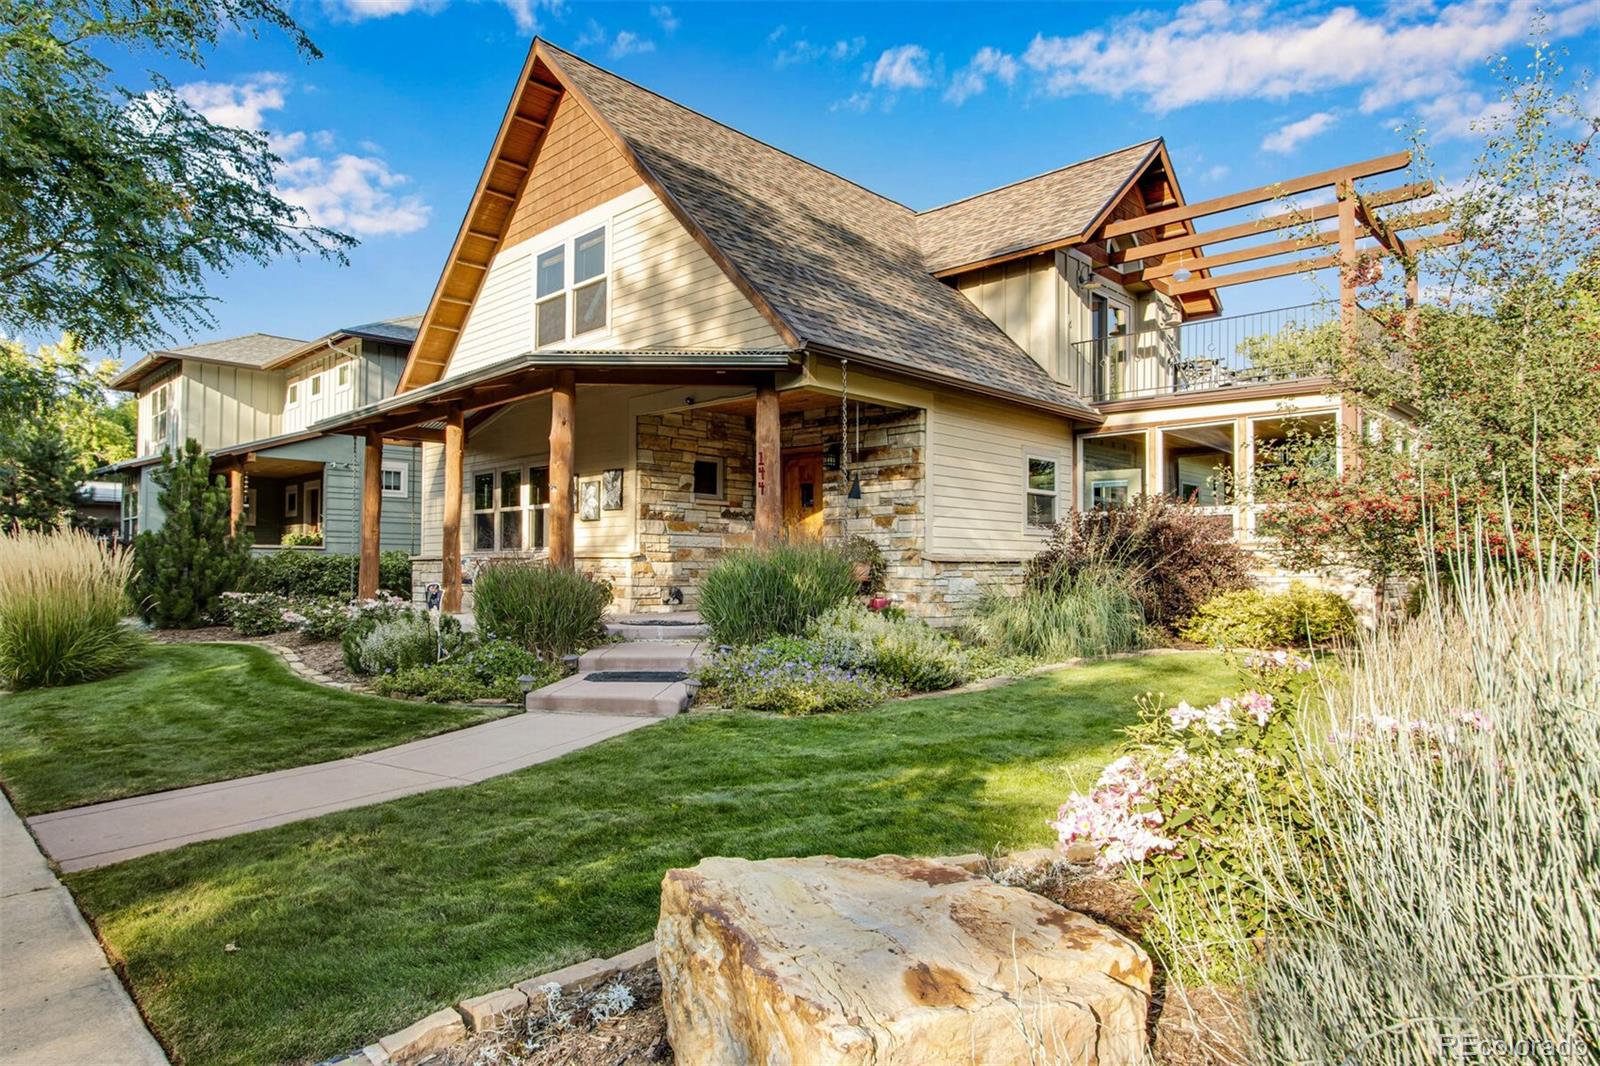 144 Frey, Fort Collins, CO